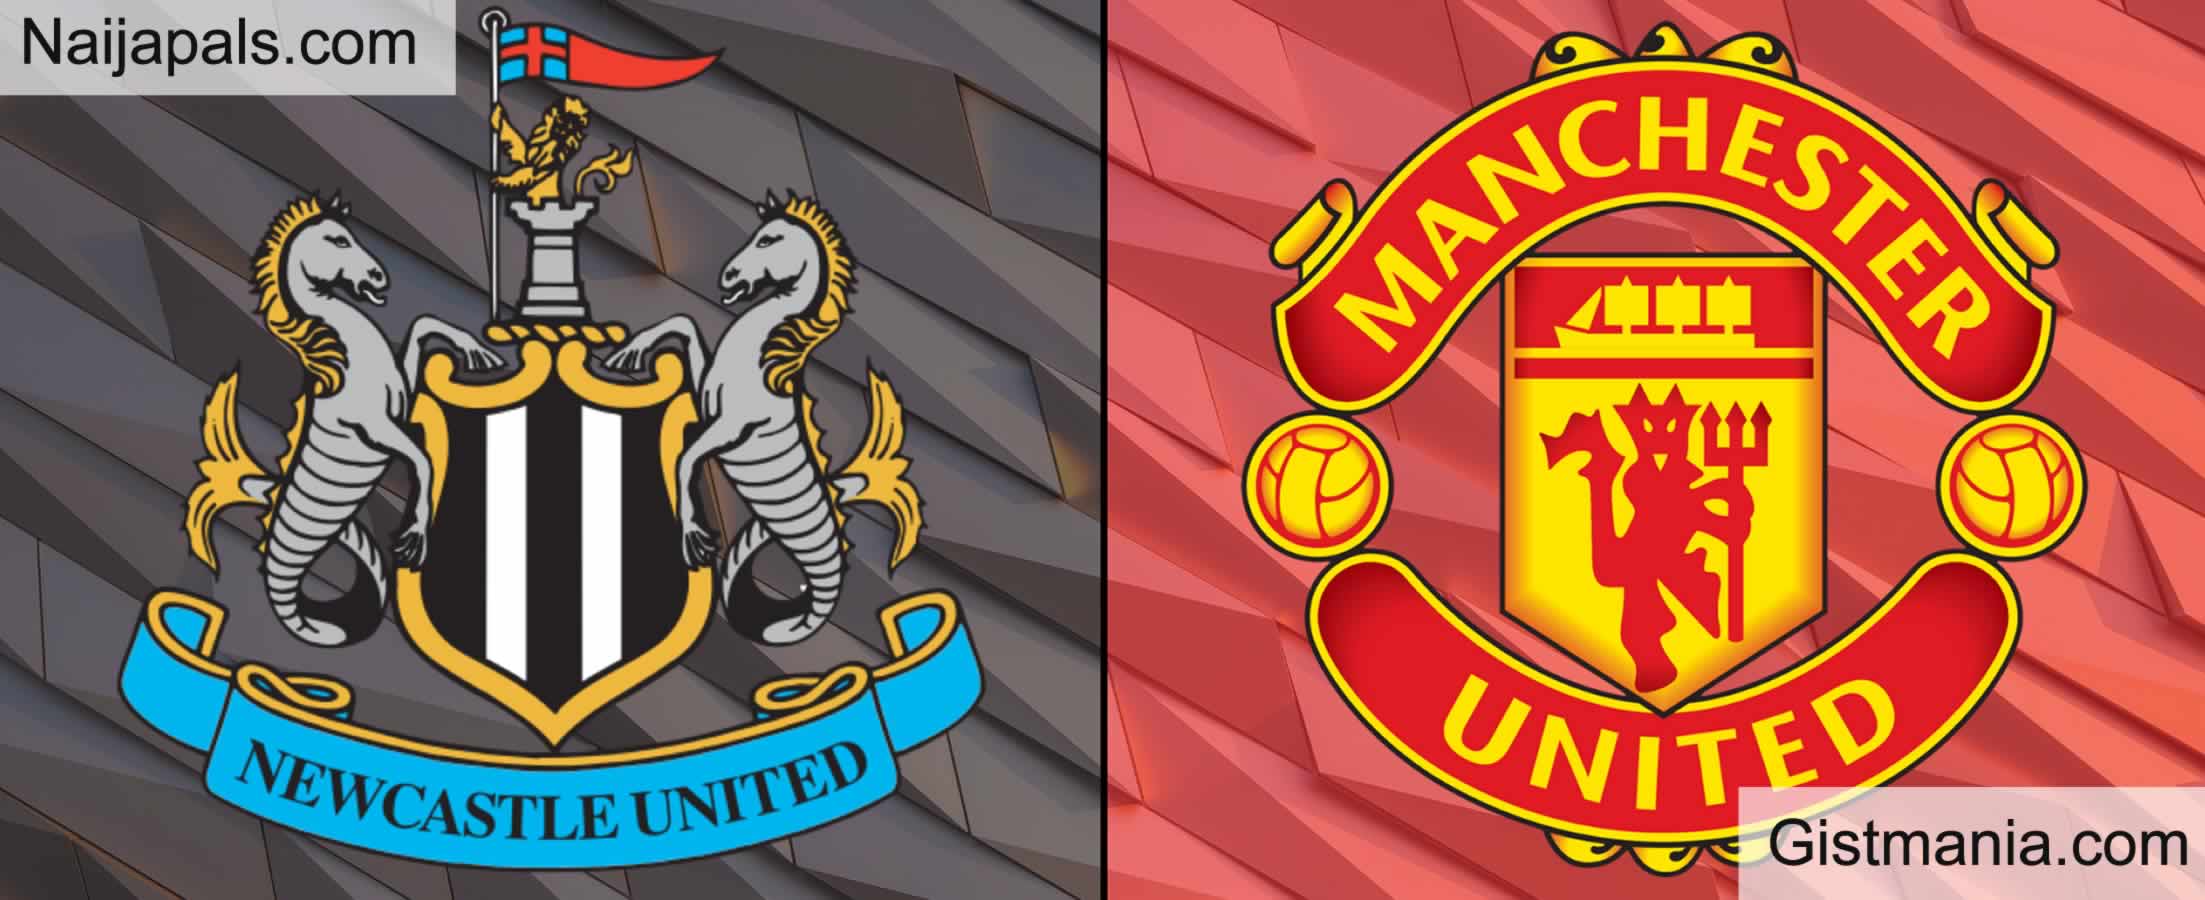 Newcastle v Manchester United: English Premier League Match,Team News,Goal  Scorers and Stats - Gistmania